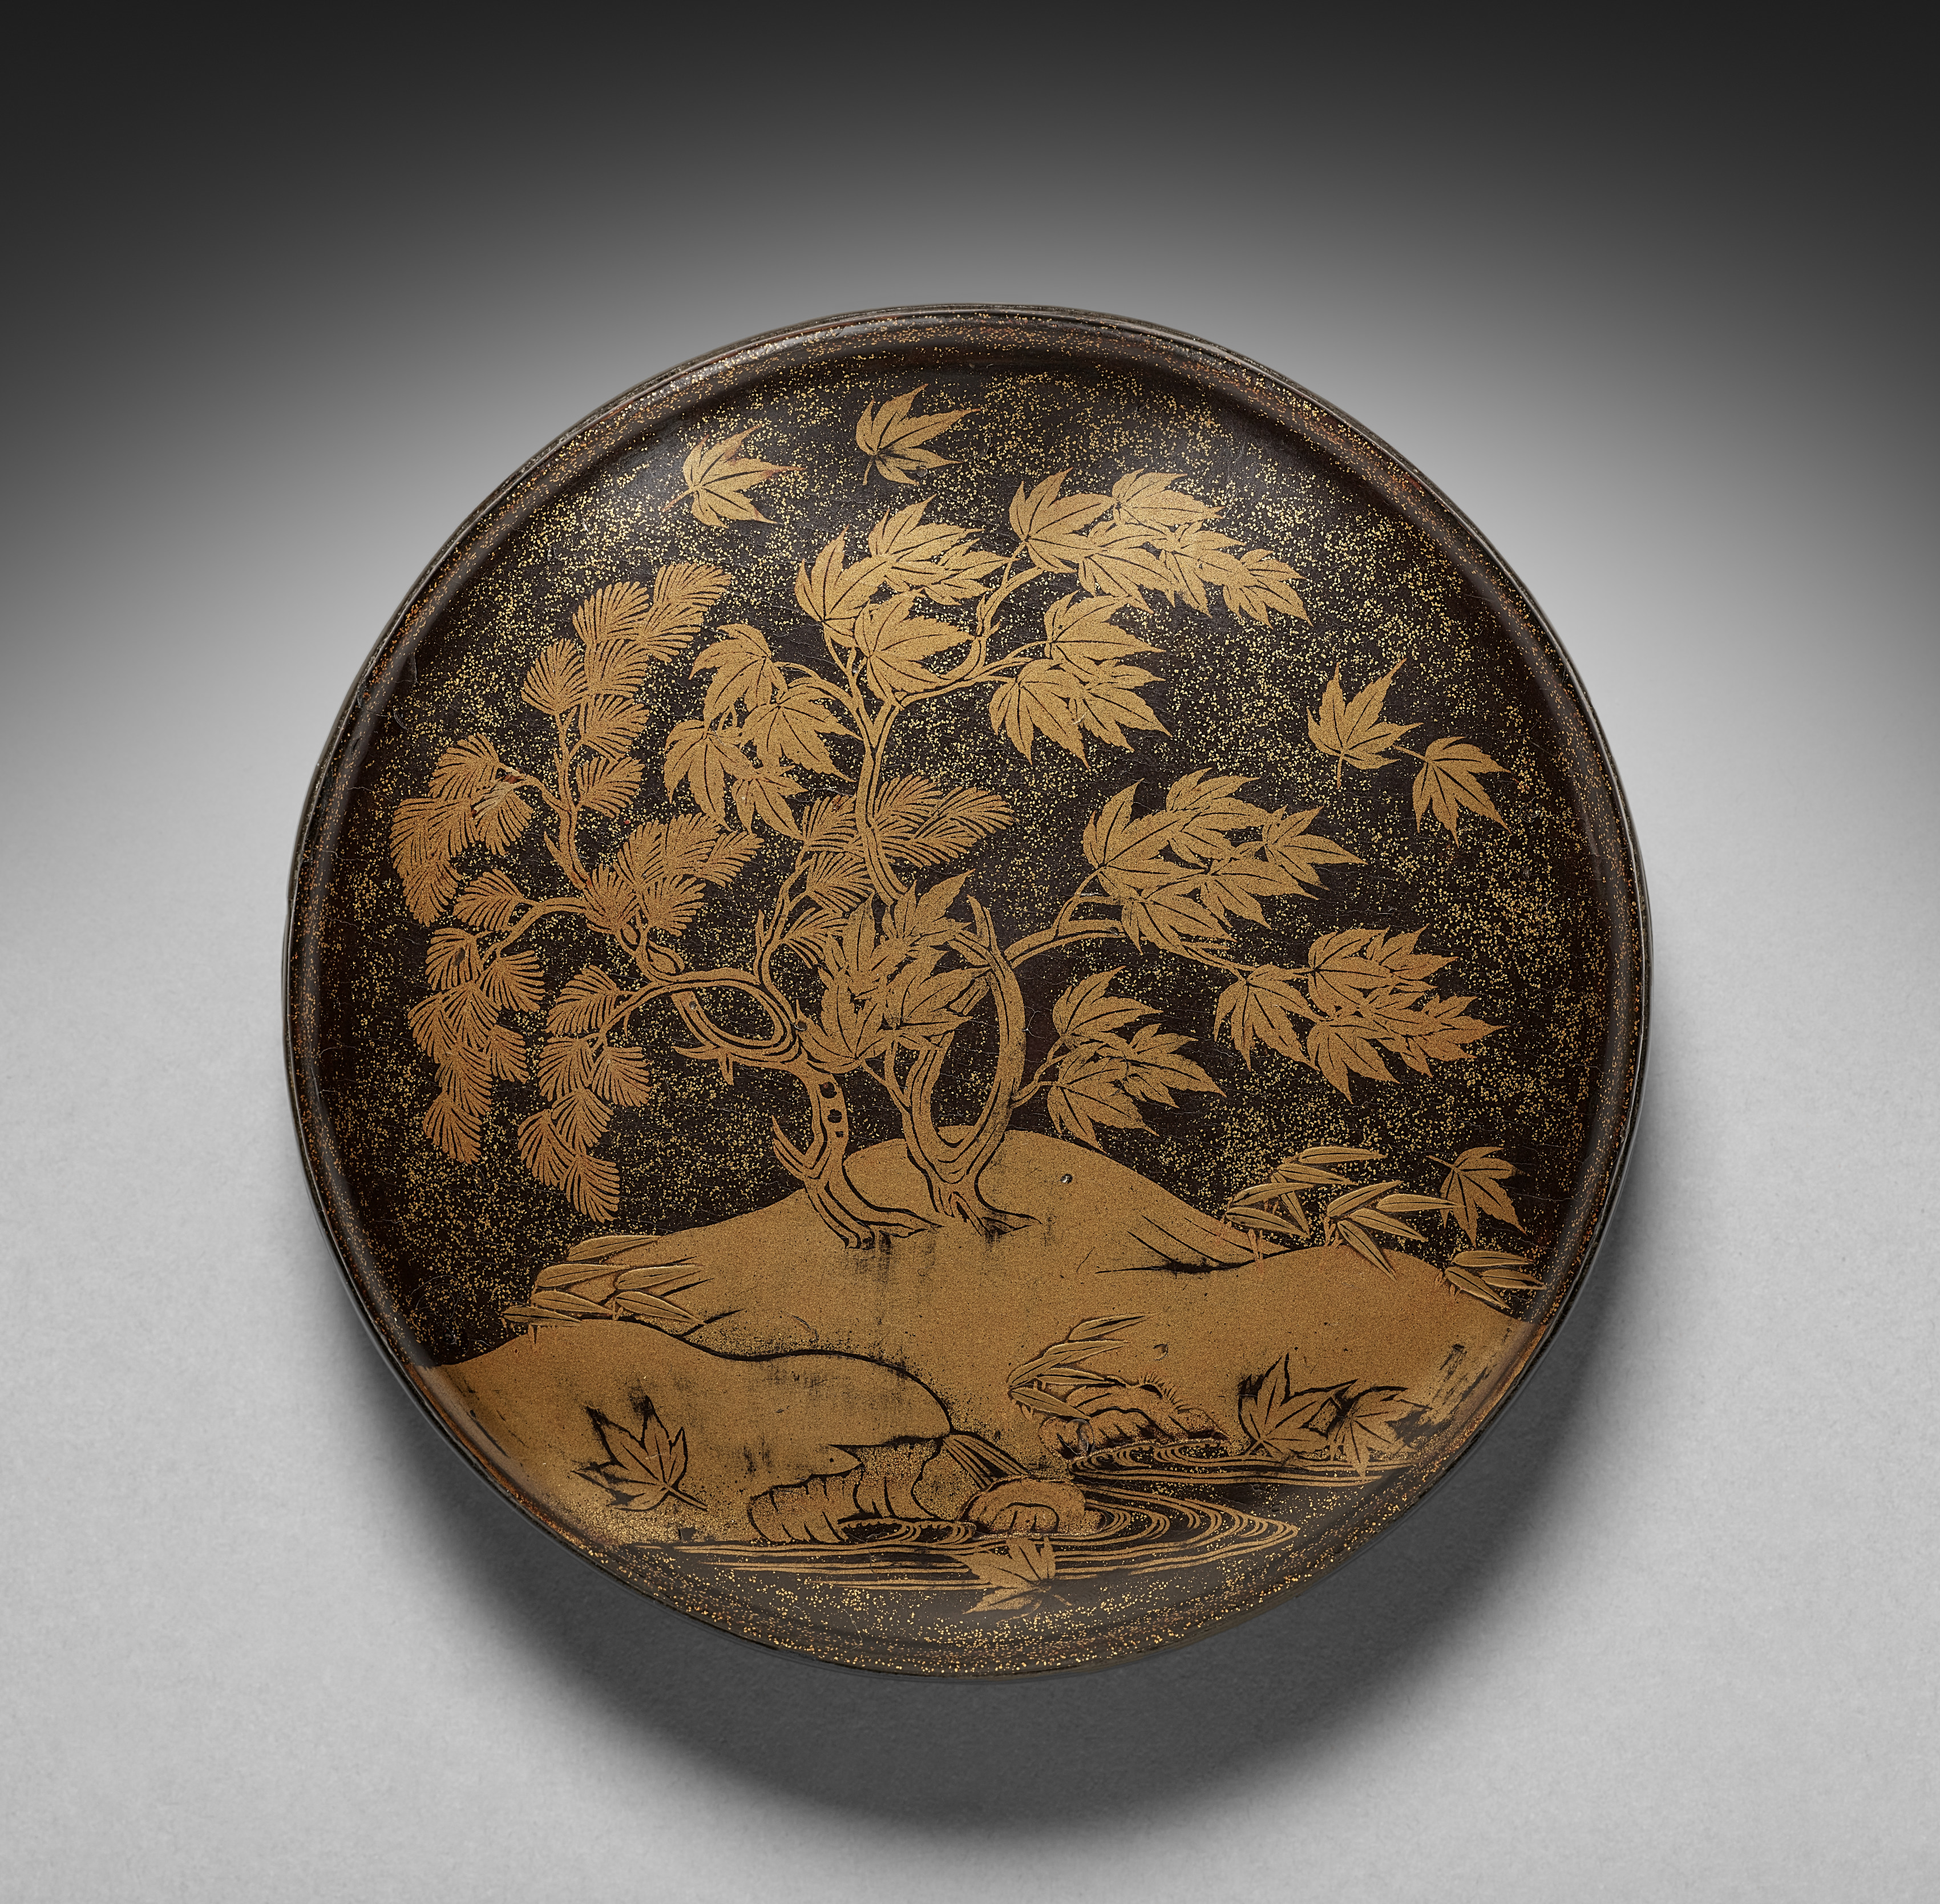 Mirror Container with Design of Maple Tree and Autumn Shower (lid)